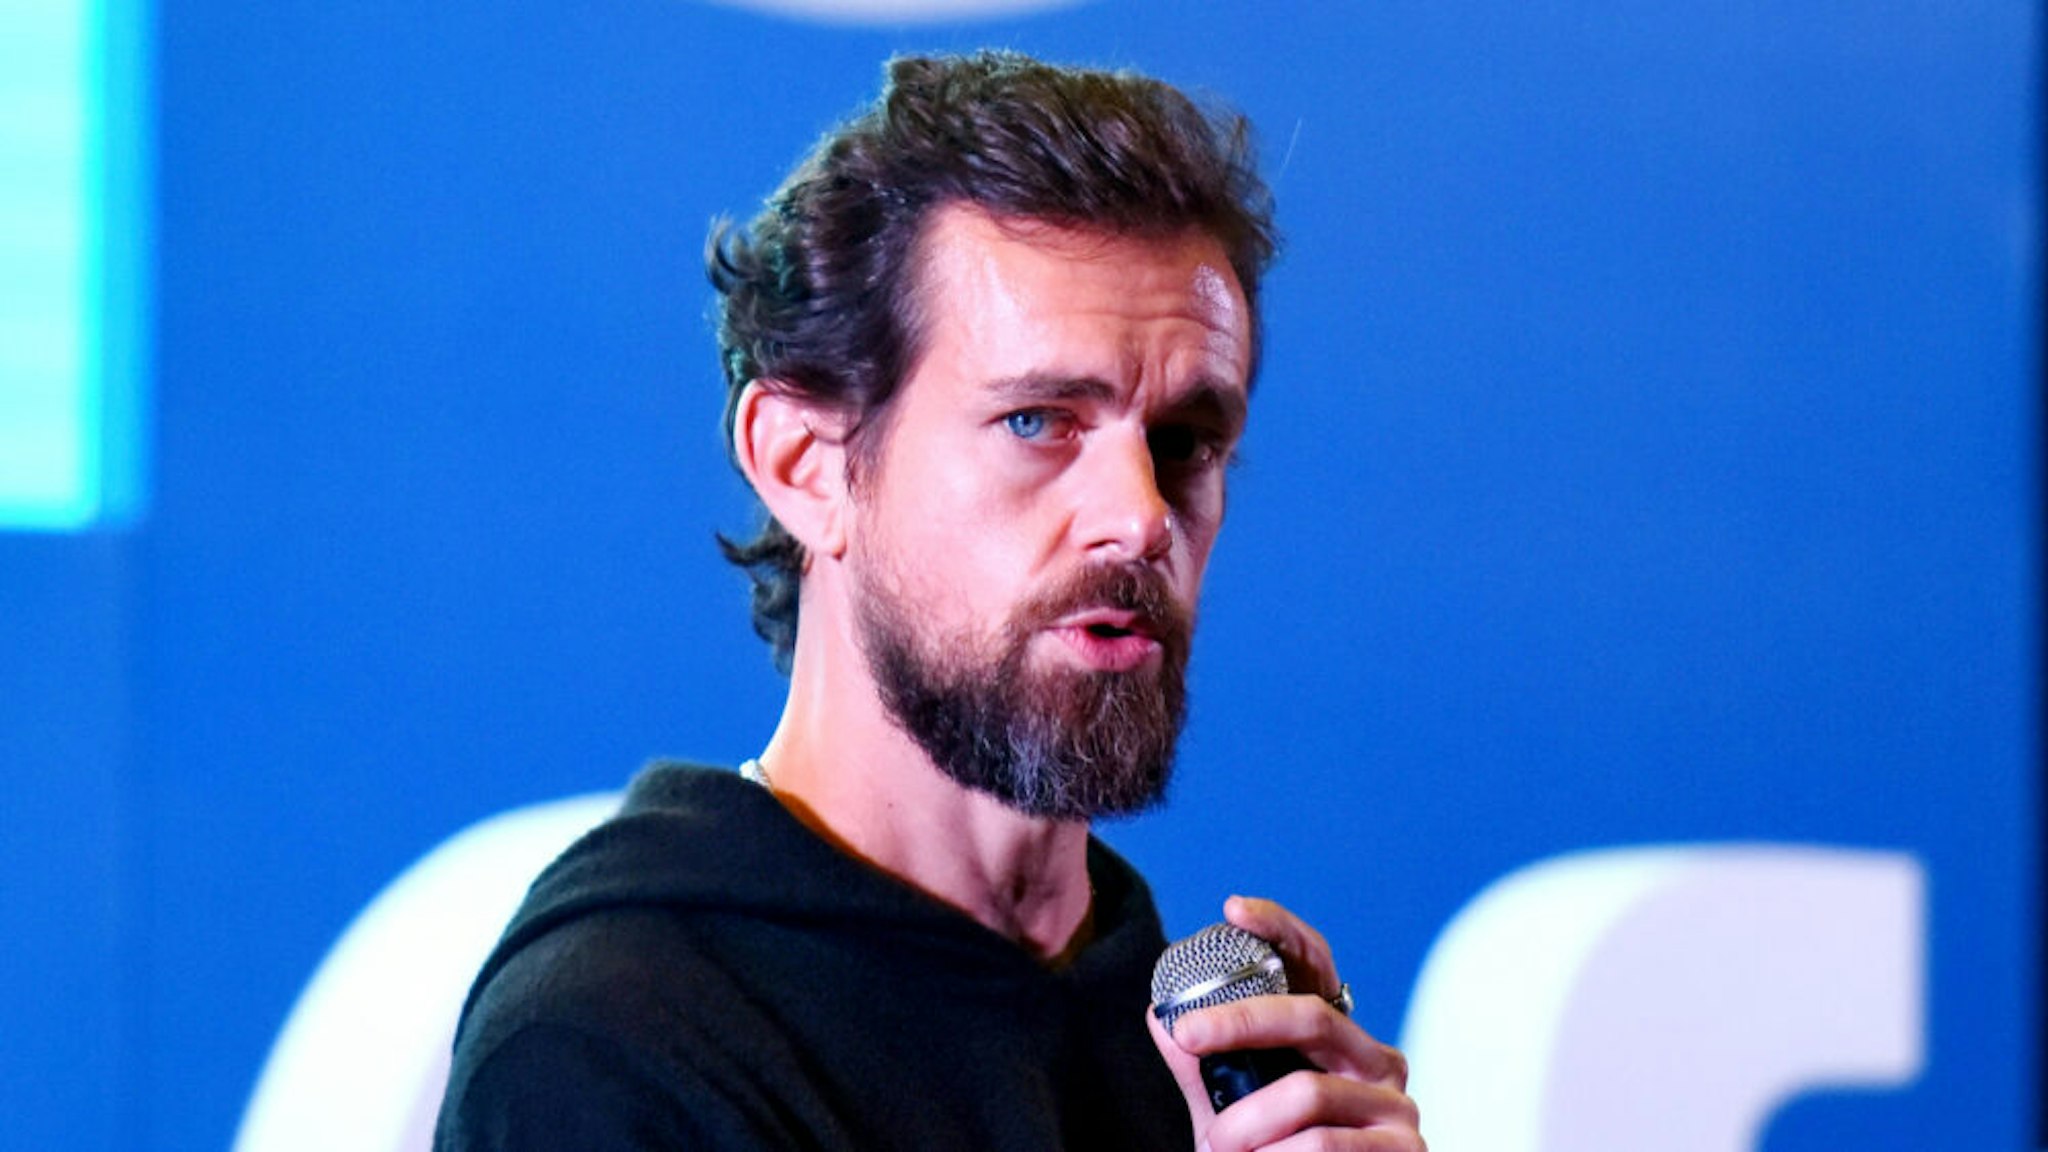 NEW DELHI, INDIA - NOVEMBER 12: Twitter CEO and Co Founder, Jack Dorsey addresses students at the Indian Institute of Technology (IIT), on November 12, 2018 in New Delhi, India.